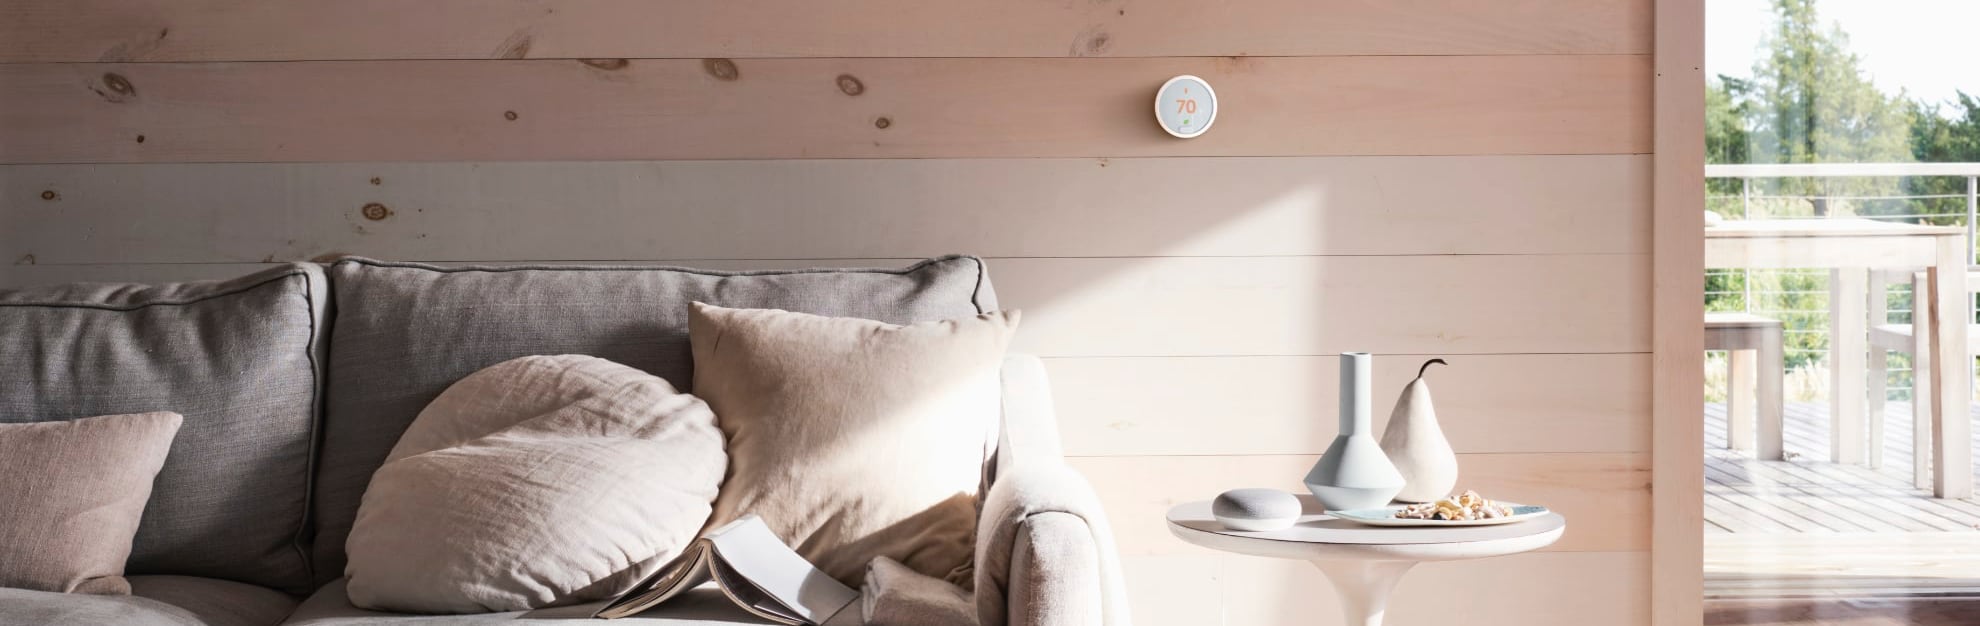 Vivint Home Automation in Tuscaloosa